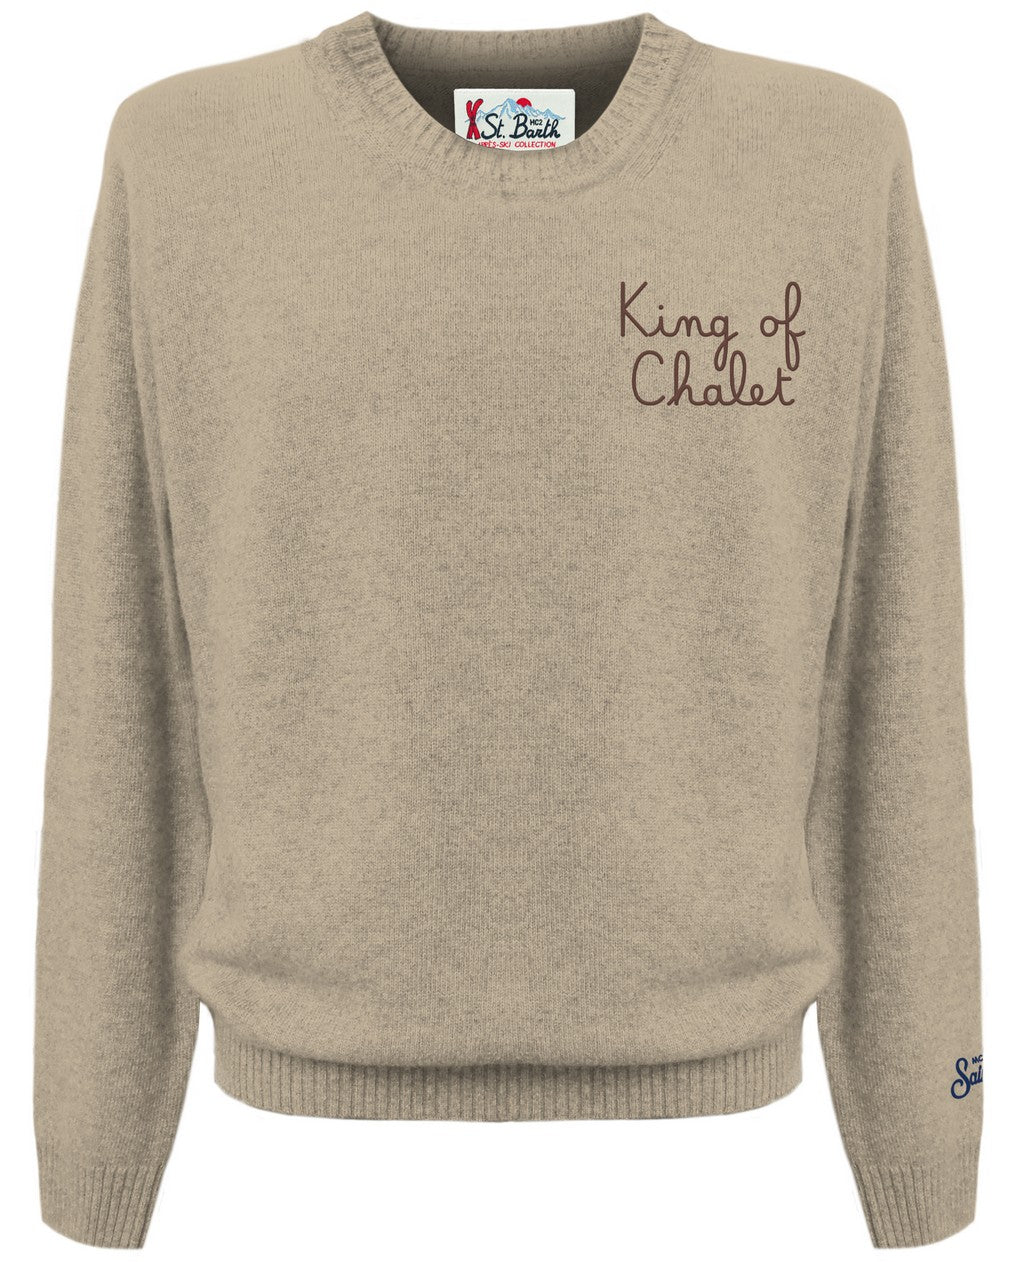 Maglione Uomo Heron King Chalet